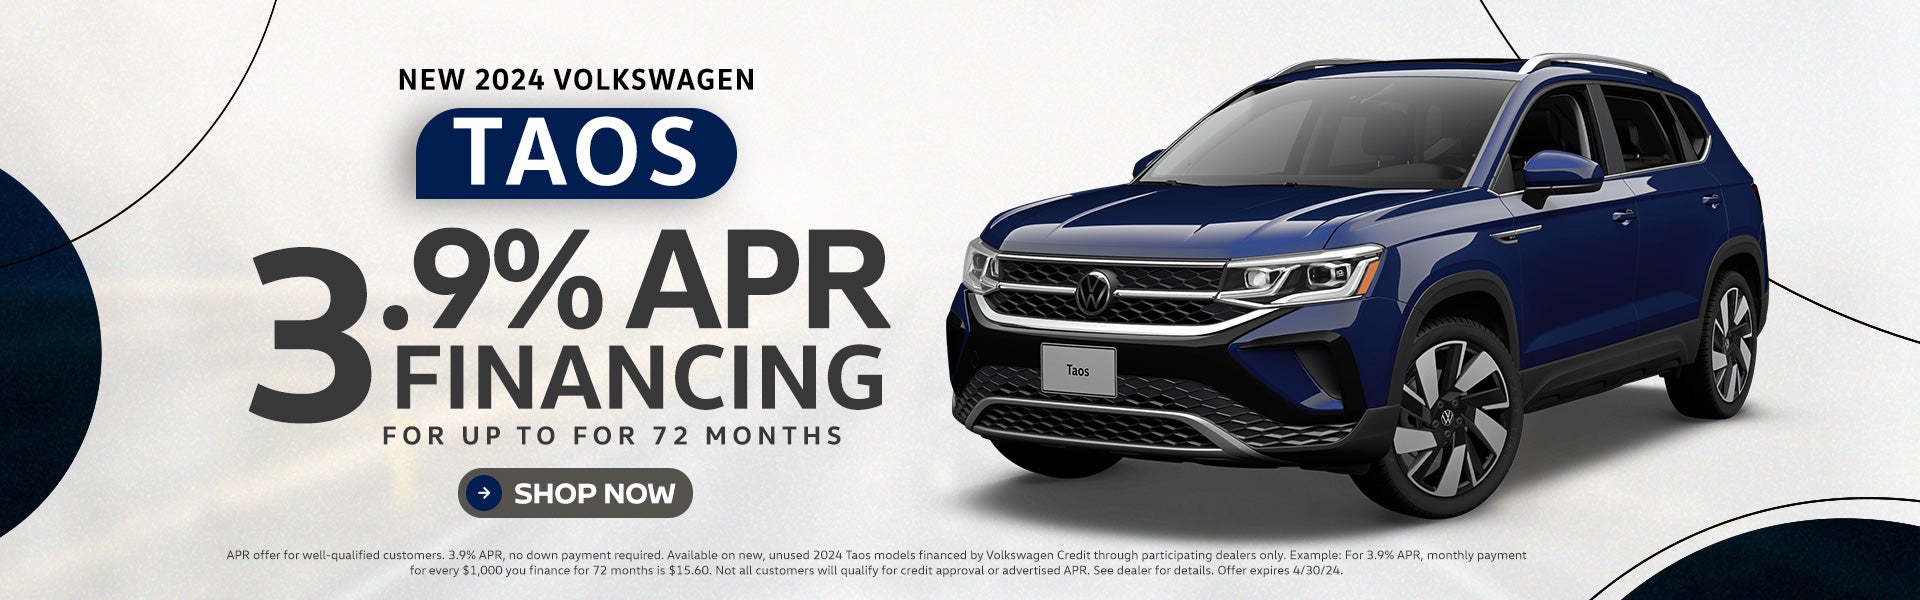 2024 Taos 3.9% APR for 72 months